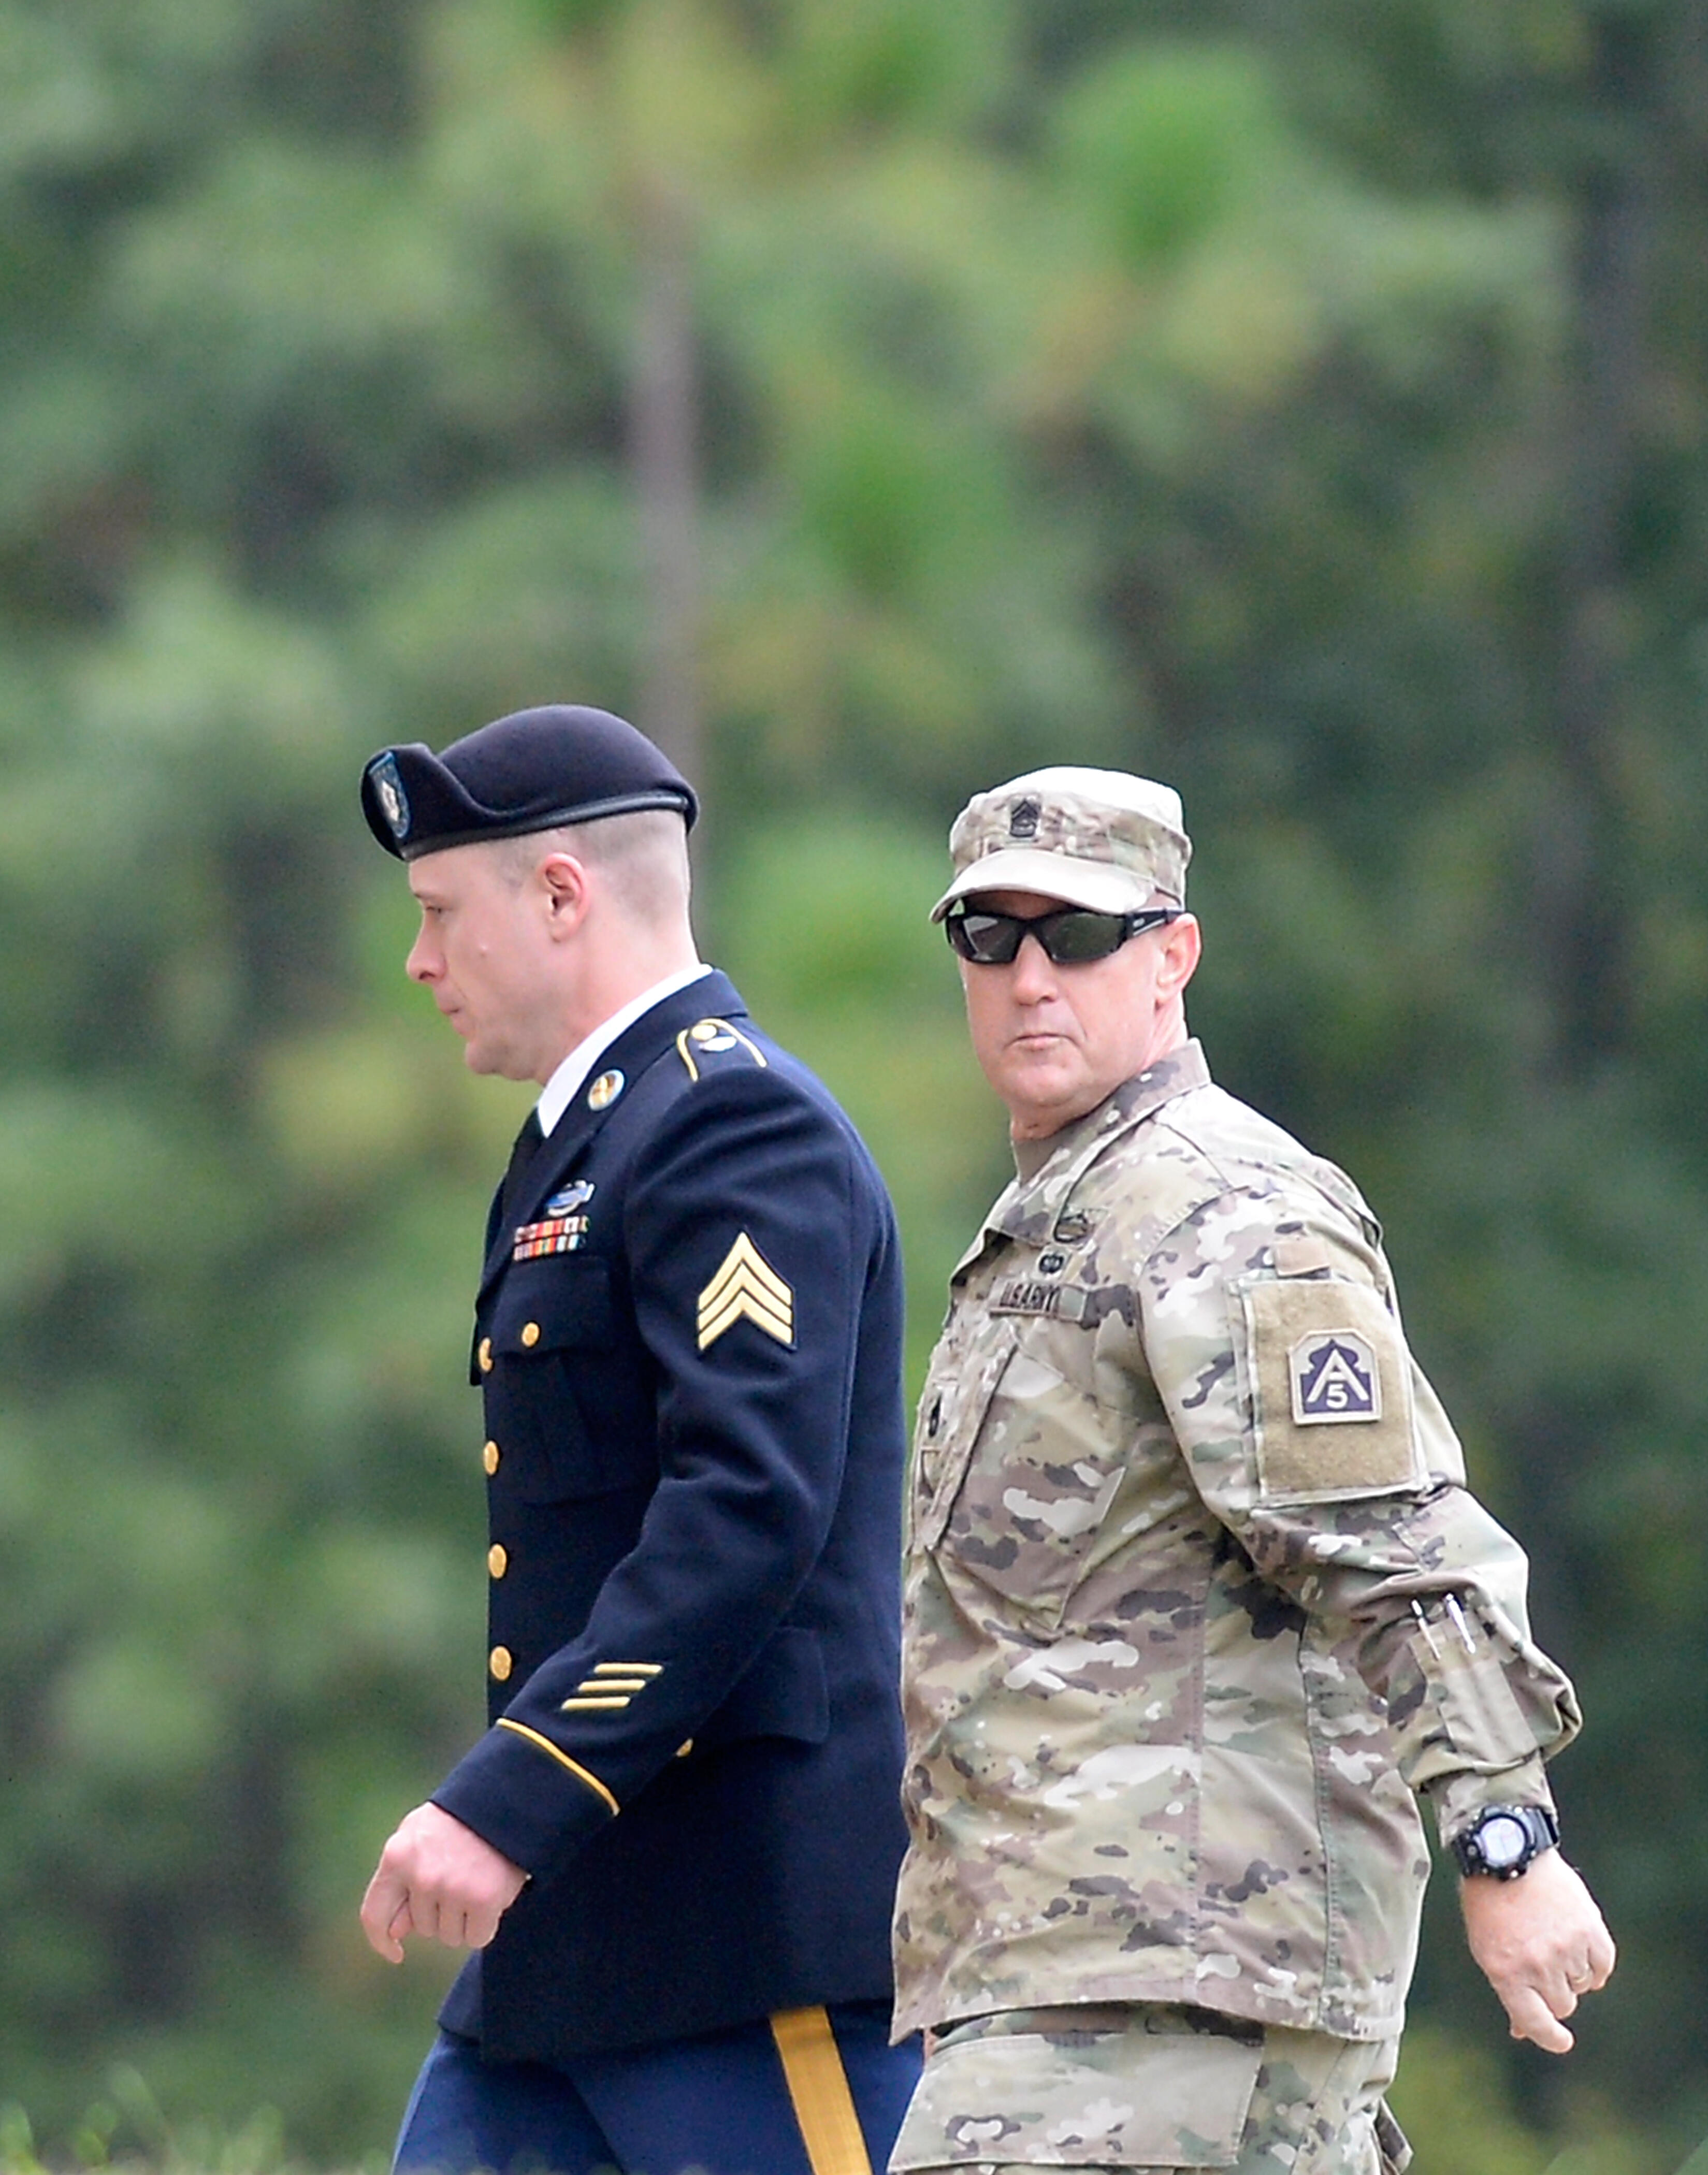 FORT BRAGG, NC - OCTOBER 16: U.S. Army Sgt. Robert Bowdrie 'Bowe' Bergdahl (L), 29 of Hailey, Idaho, is escorted into the Ft. Bragg military courthouse for a motion hearing on October 16, 2017, in Fort Bragg, North Carolina. Bergdahl faces charges of desertion and endangering troops stemming from his decision to leave his outpost in 2009, which landed him five years in Taliban captivity. (Photo by Sara D. Davis/Getty Images)